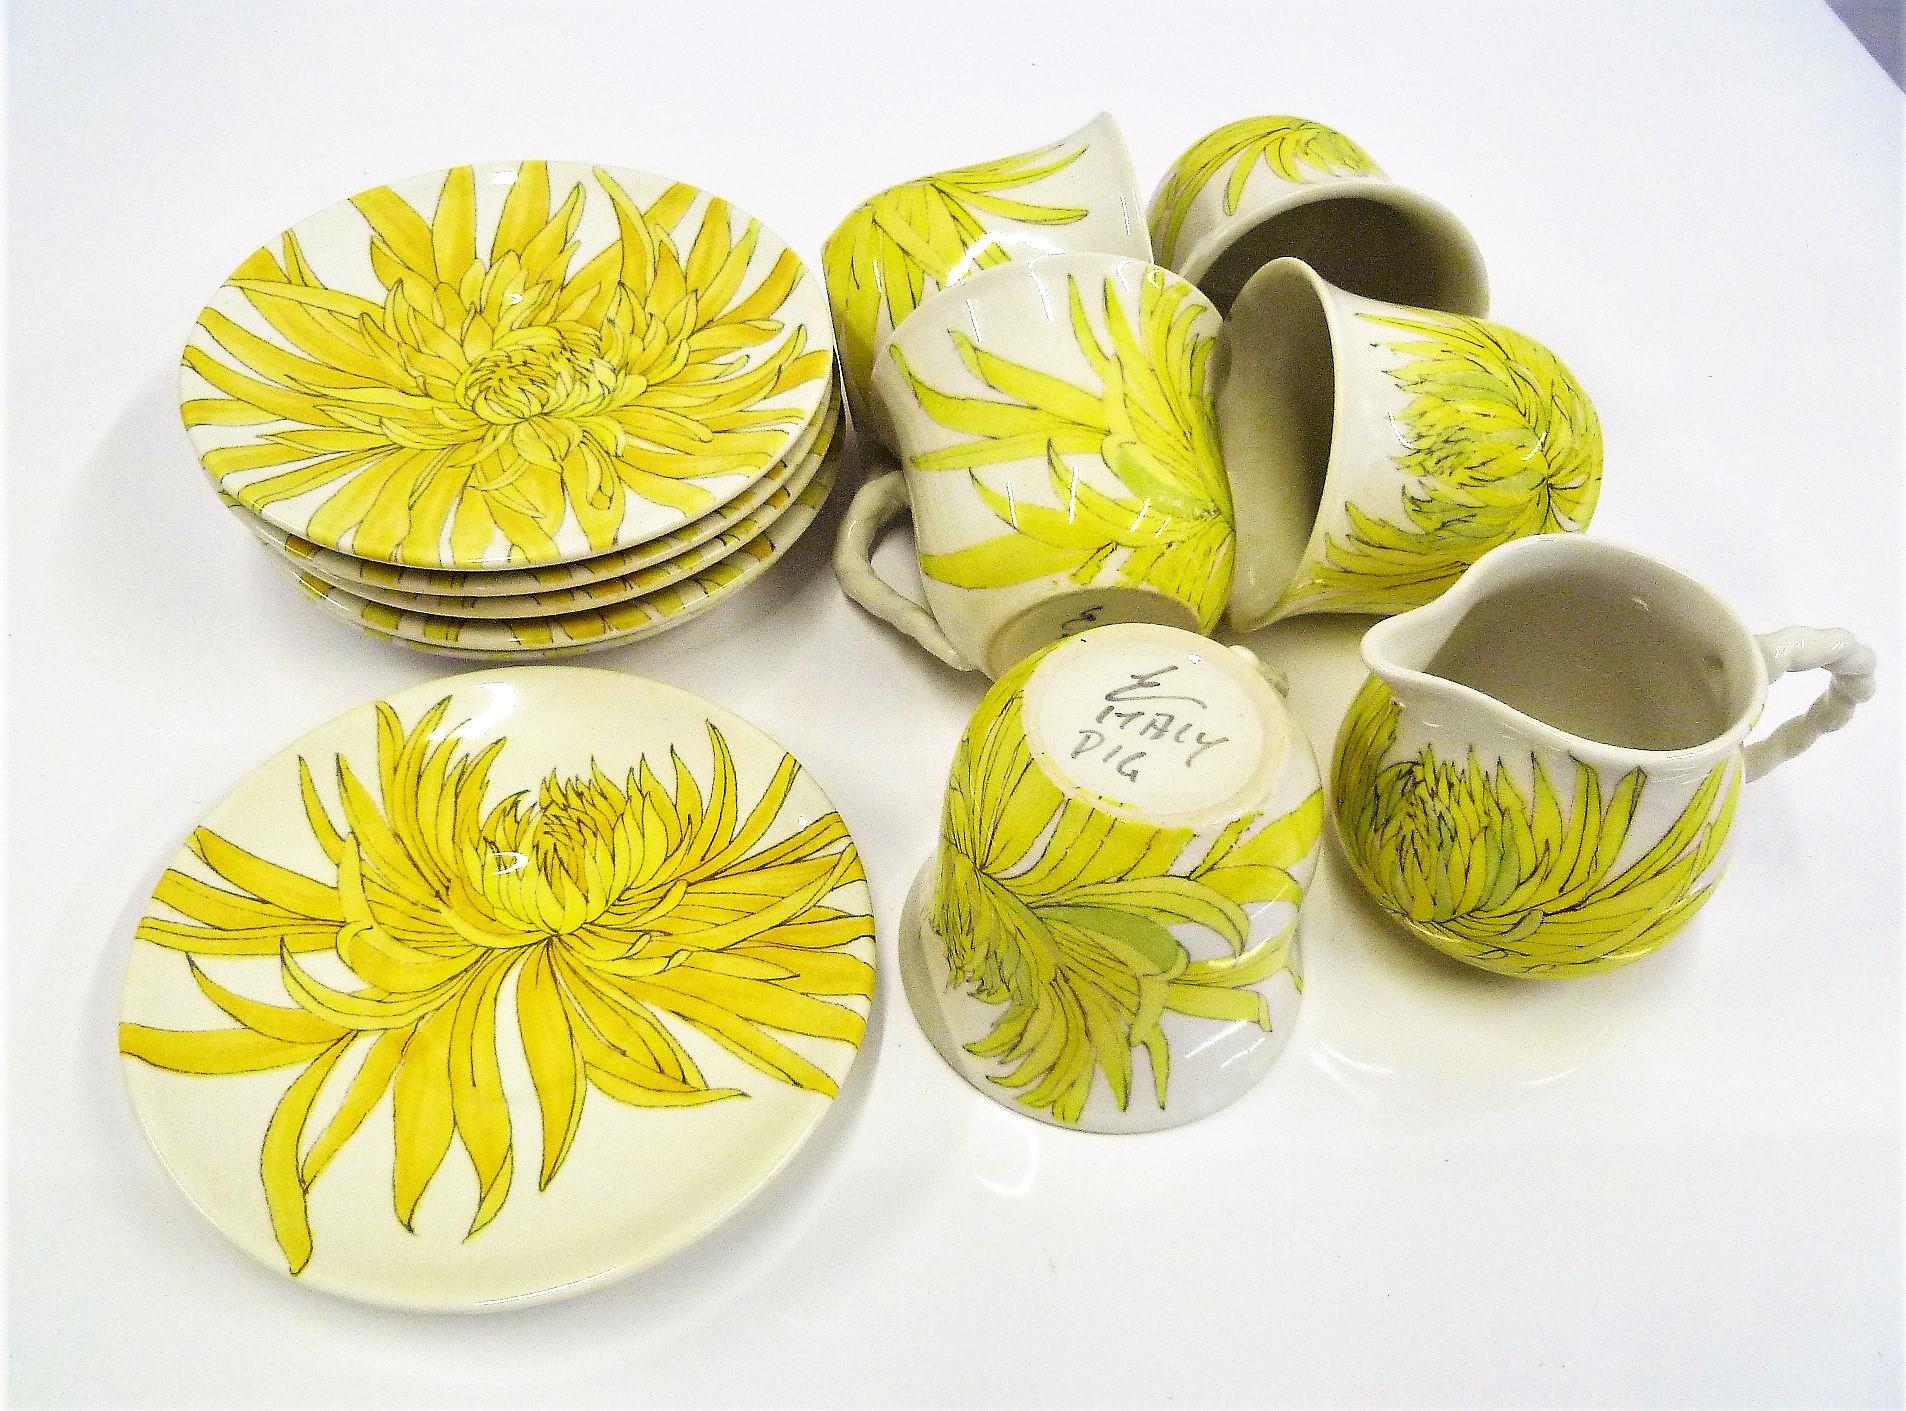 A set of 5 coffee cups and saucers plus a creamer with saucer in bright and cheerful Chrysanthemum pattern by Ceramiche Ernestine from Salerno in Northern Italy from the 1950s. Ernestine Cannon designed all patterns and shapes for her company. Her